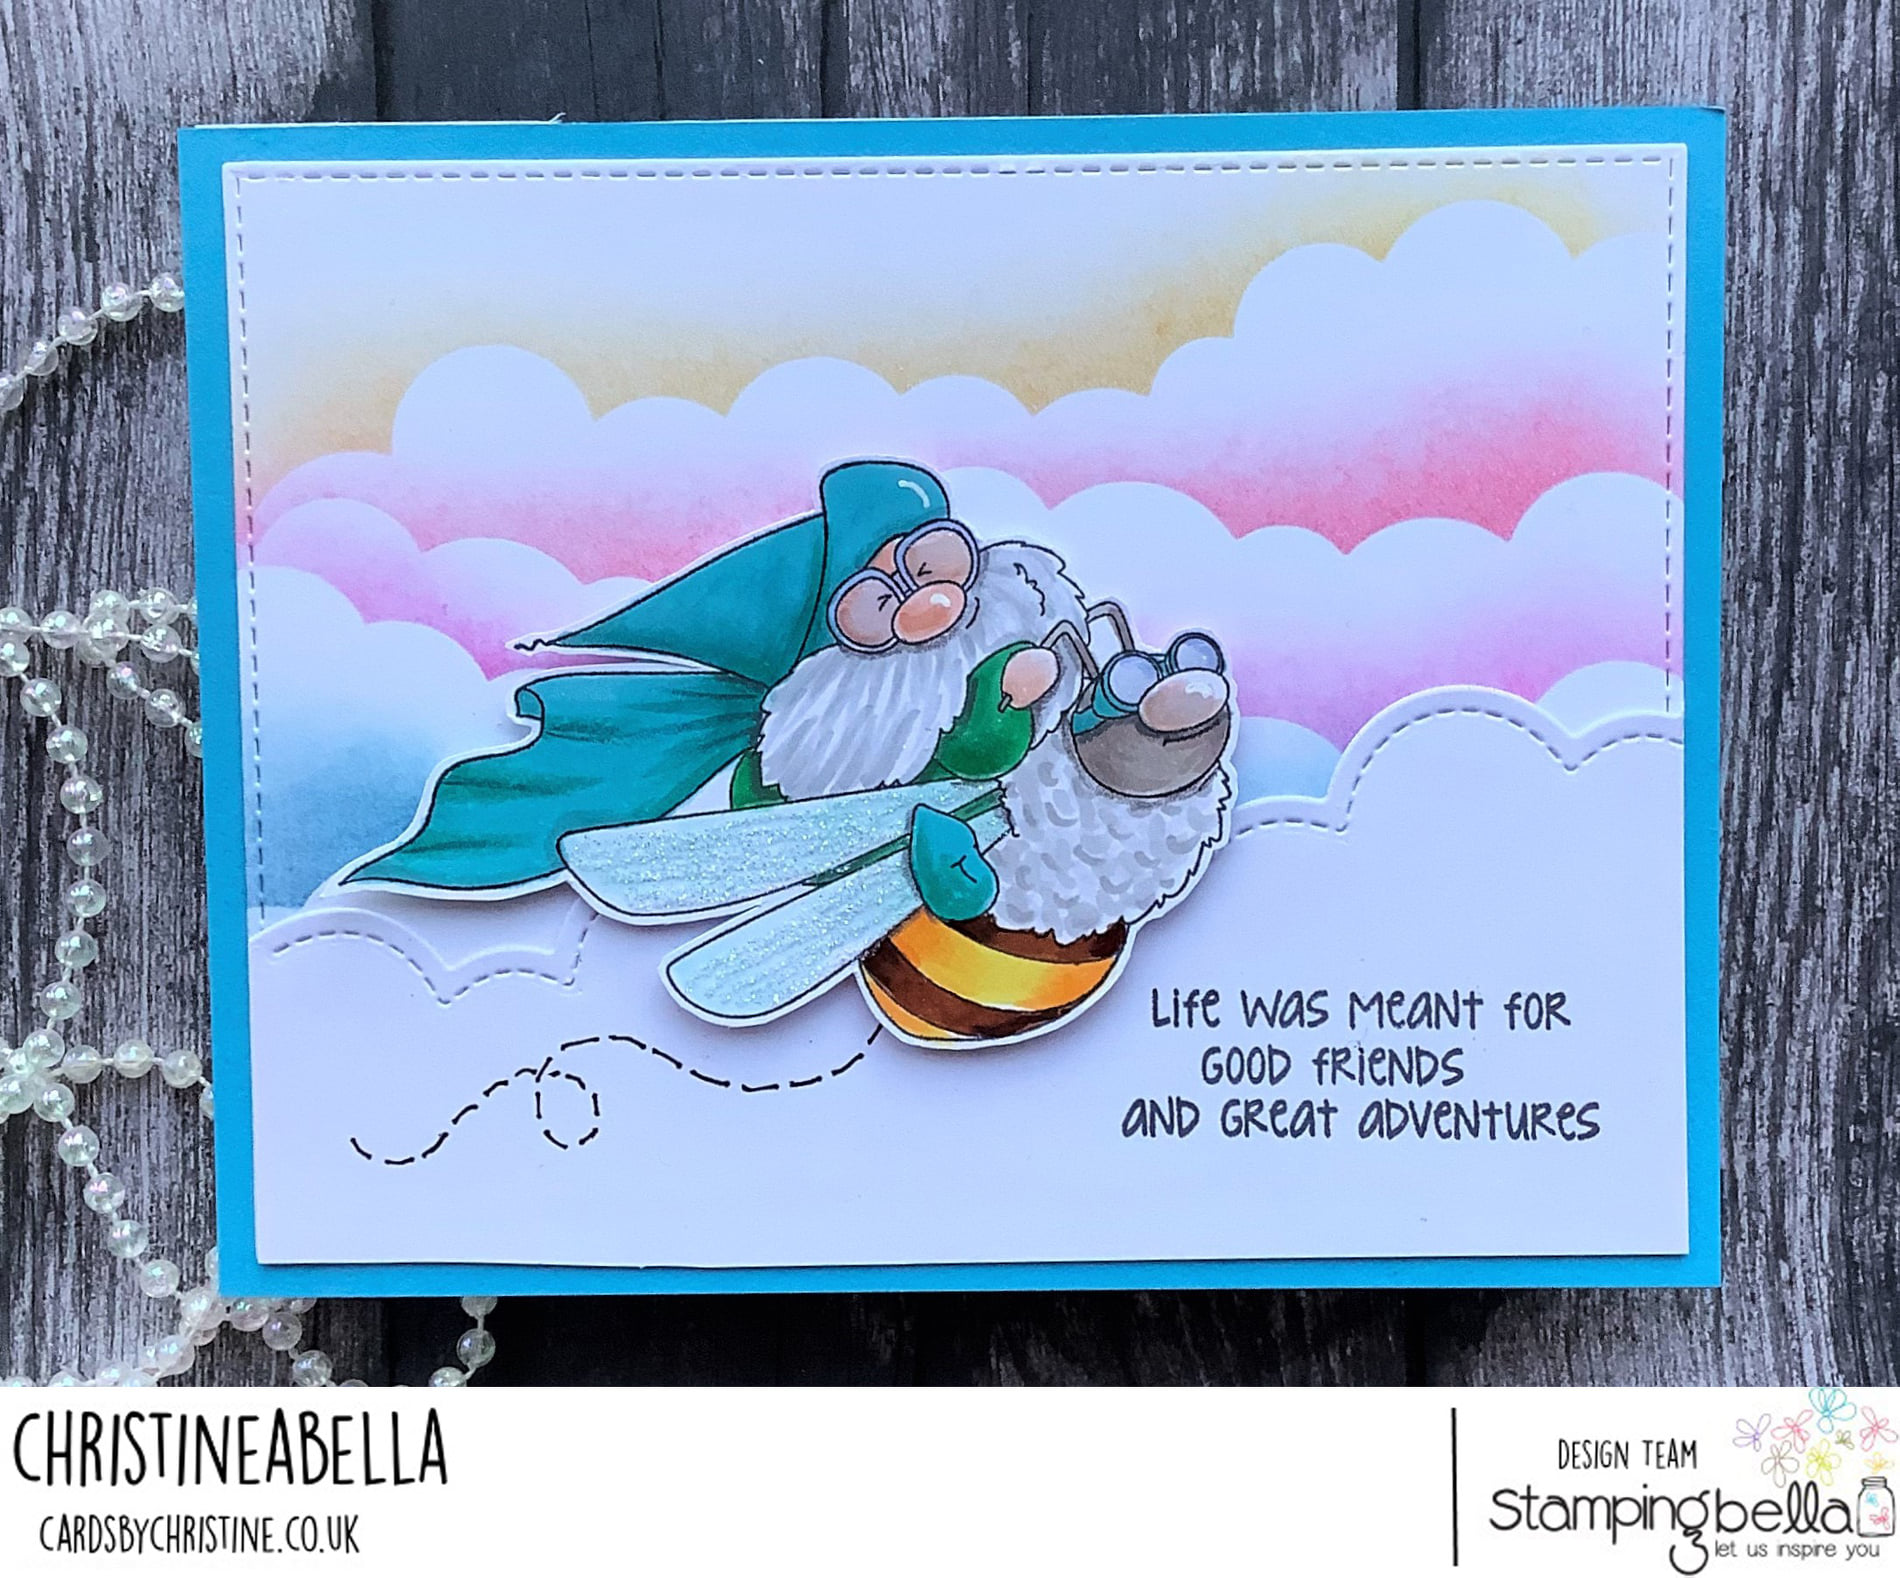 www.stampingbella.com: Rubber stamp used:  FLYING GNOME. CARD By Christine Levison